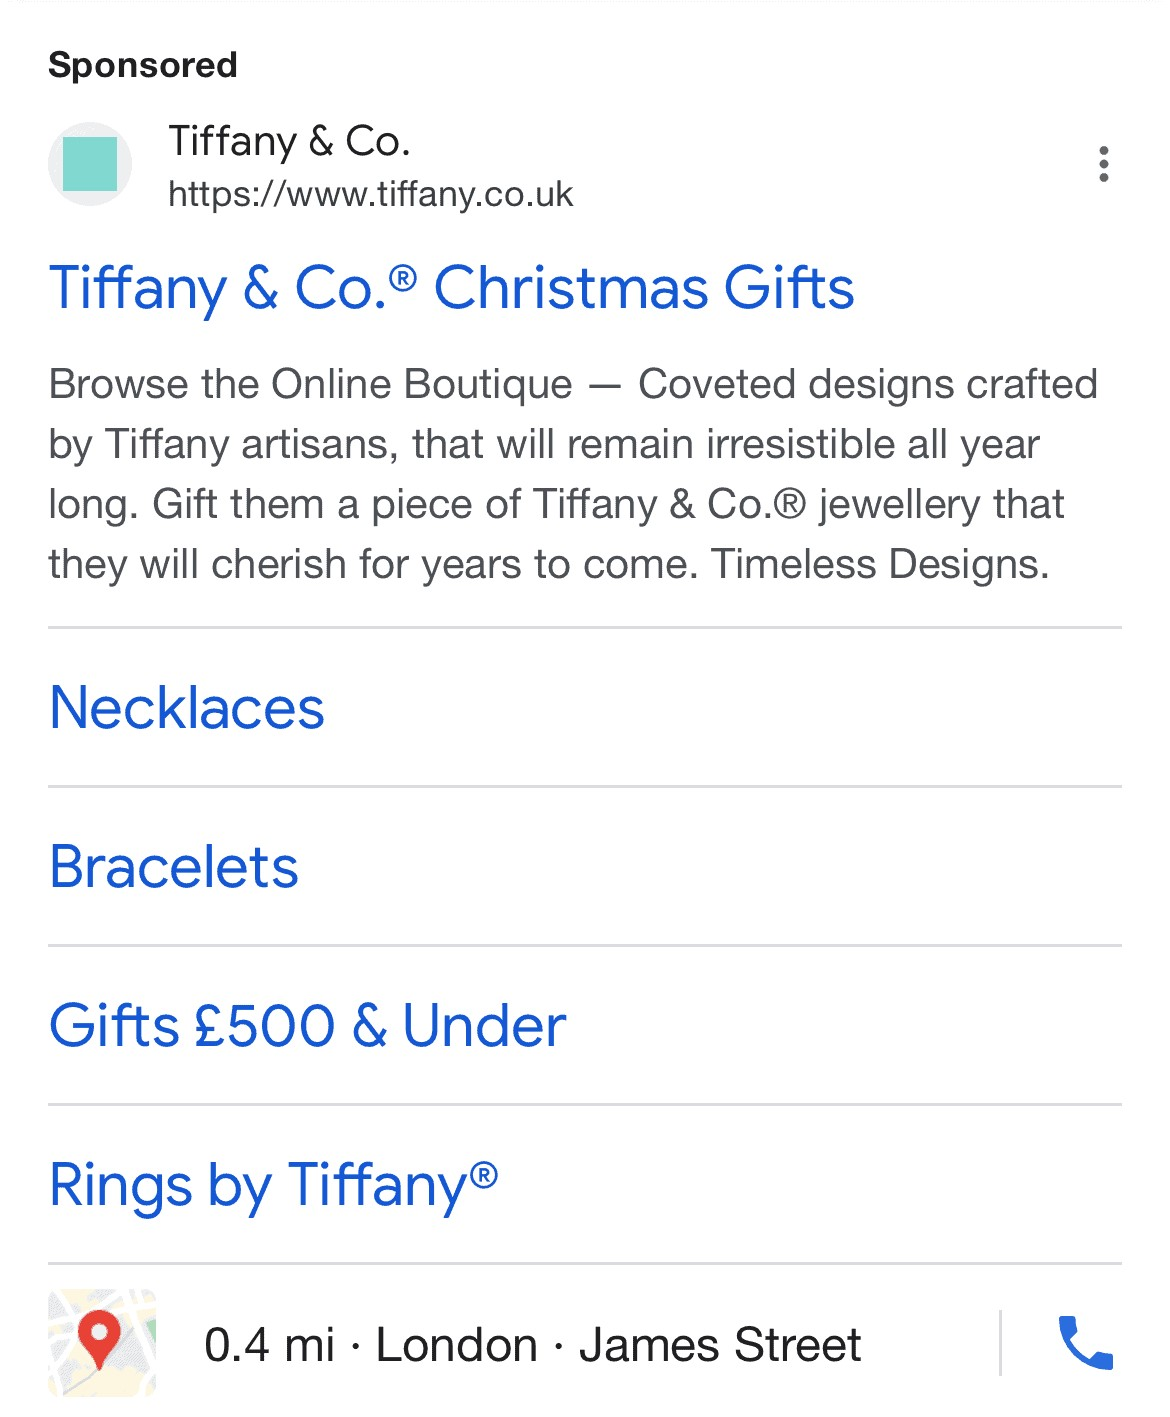 Tiffany & Co.'s google search mobile ad displayed to users in London, England